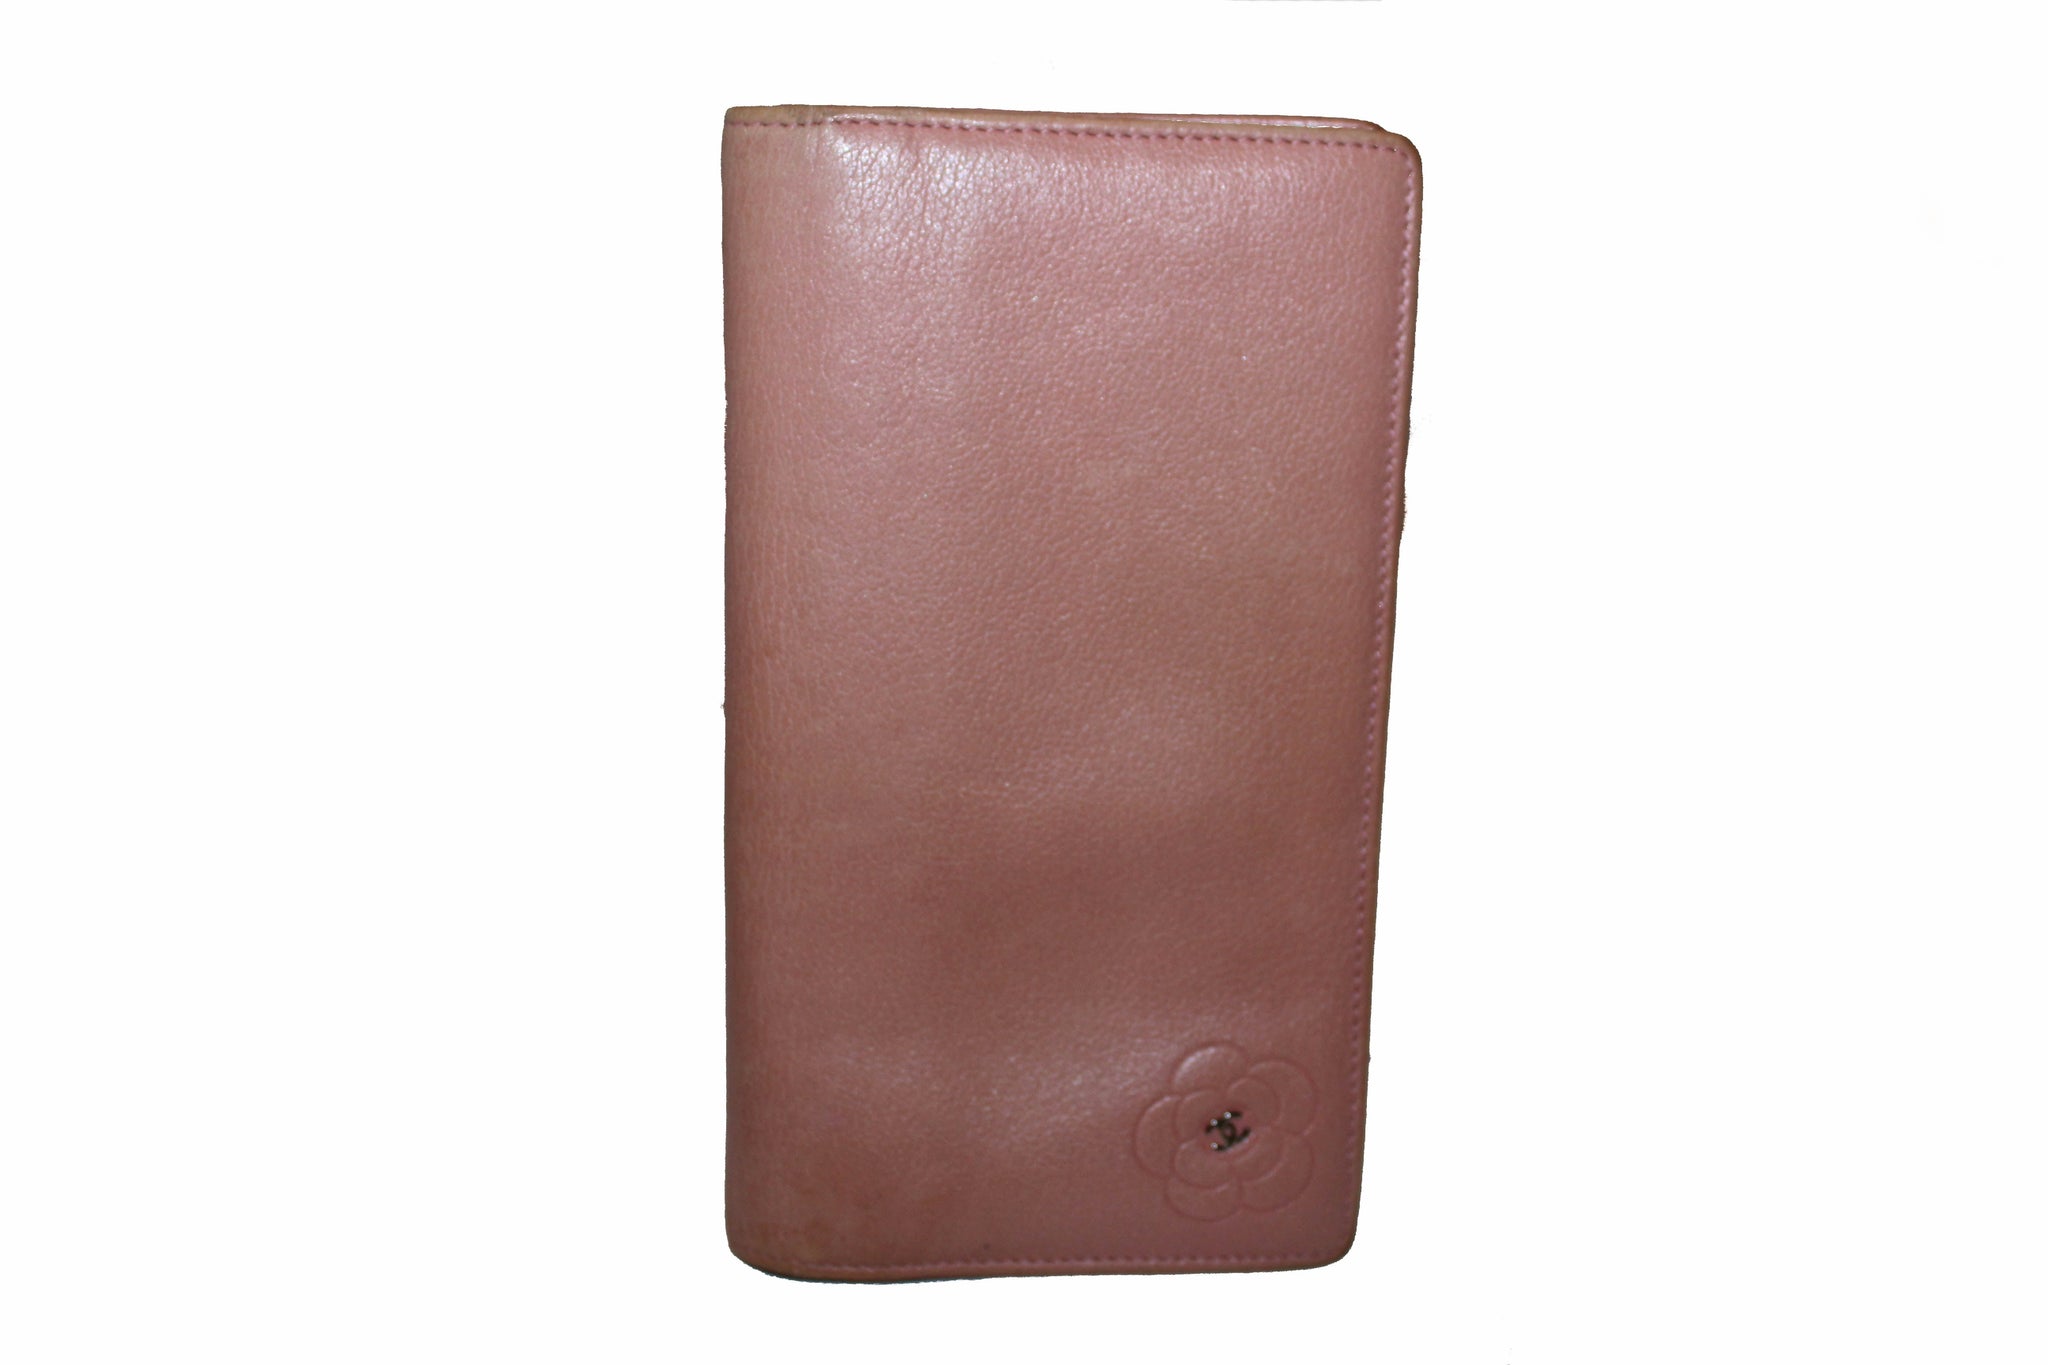 Chanel Pink Calfskin Leather Flap Camellia Wallet